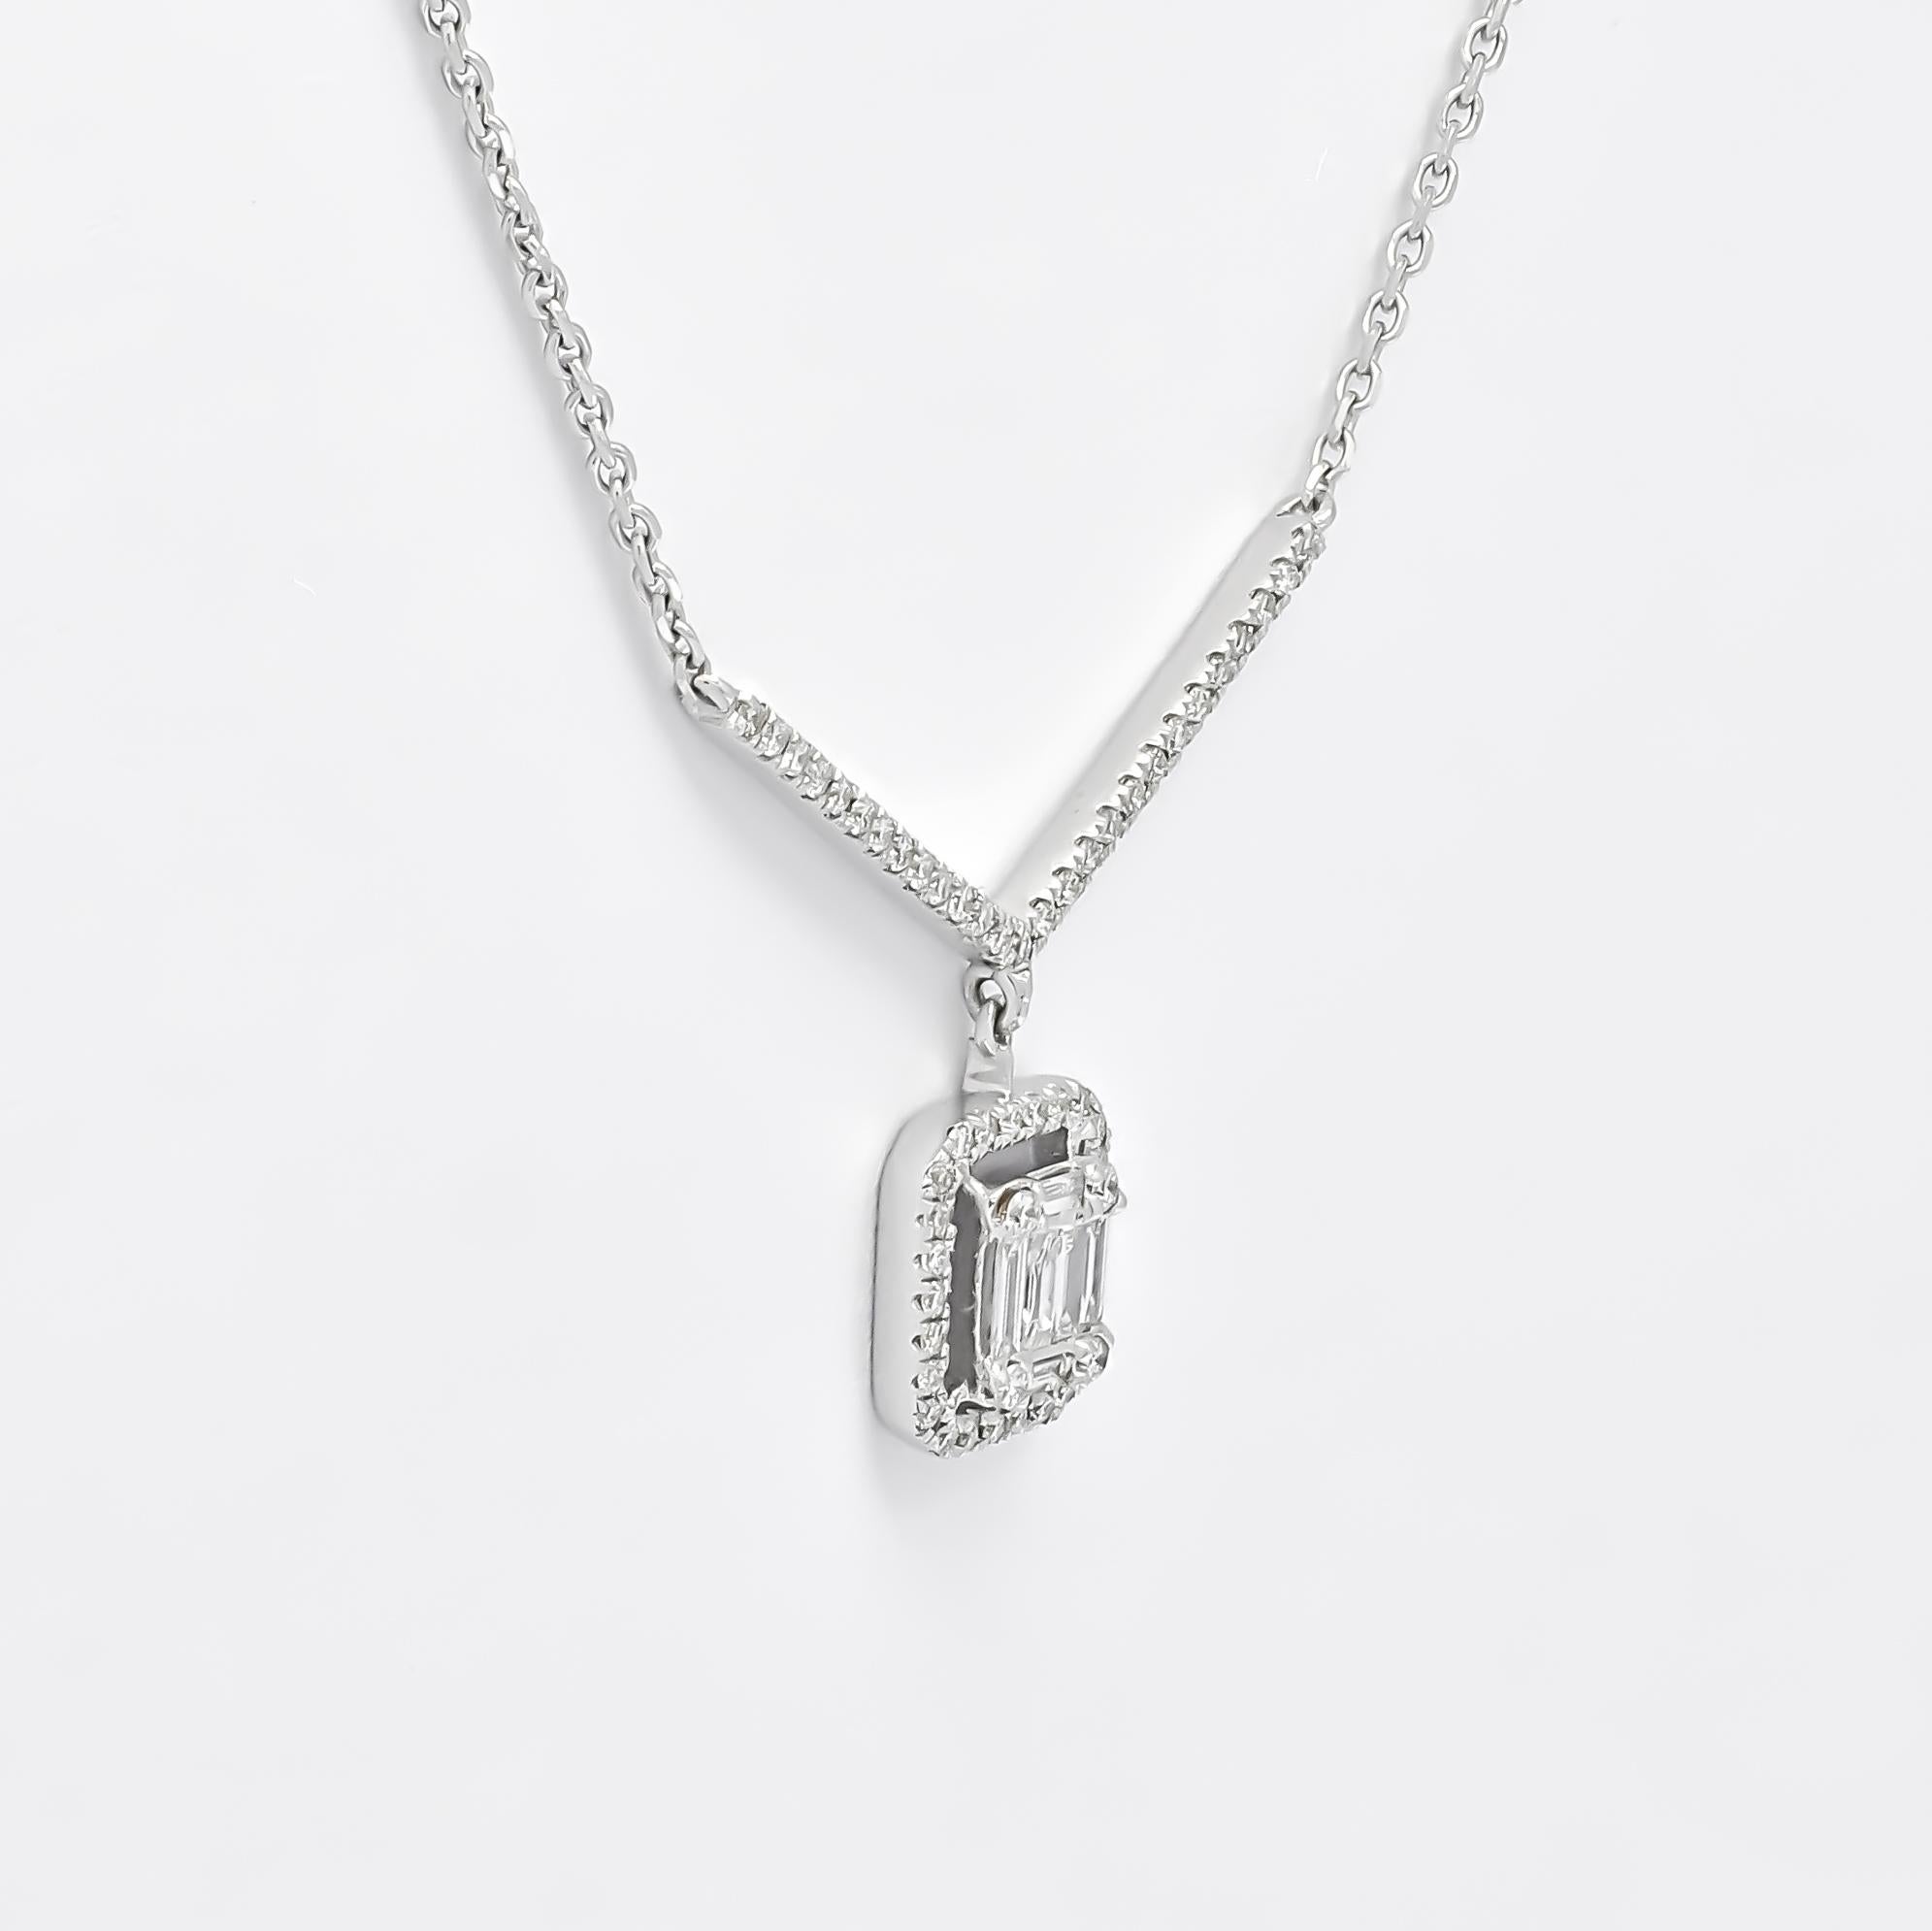 This 18KT White Gold Natural Diamonds Single Row Horizontal Baguette Round Halo Cluster Art Deco Chain Pendant is a truly exquisite piece of jewelry that showcases a total of 0.30 carats of dazzling diamonds. The beautifully crafted round-cut